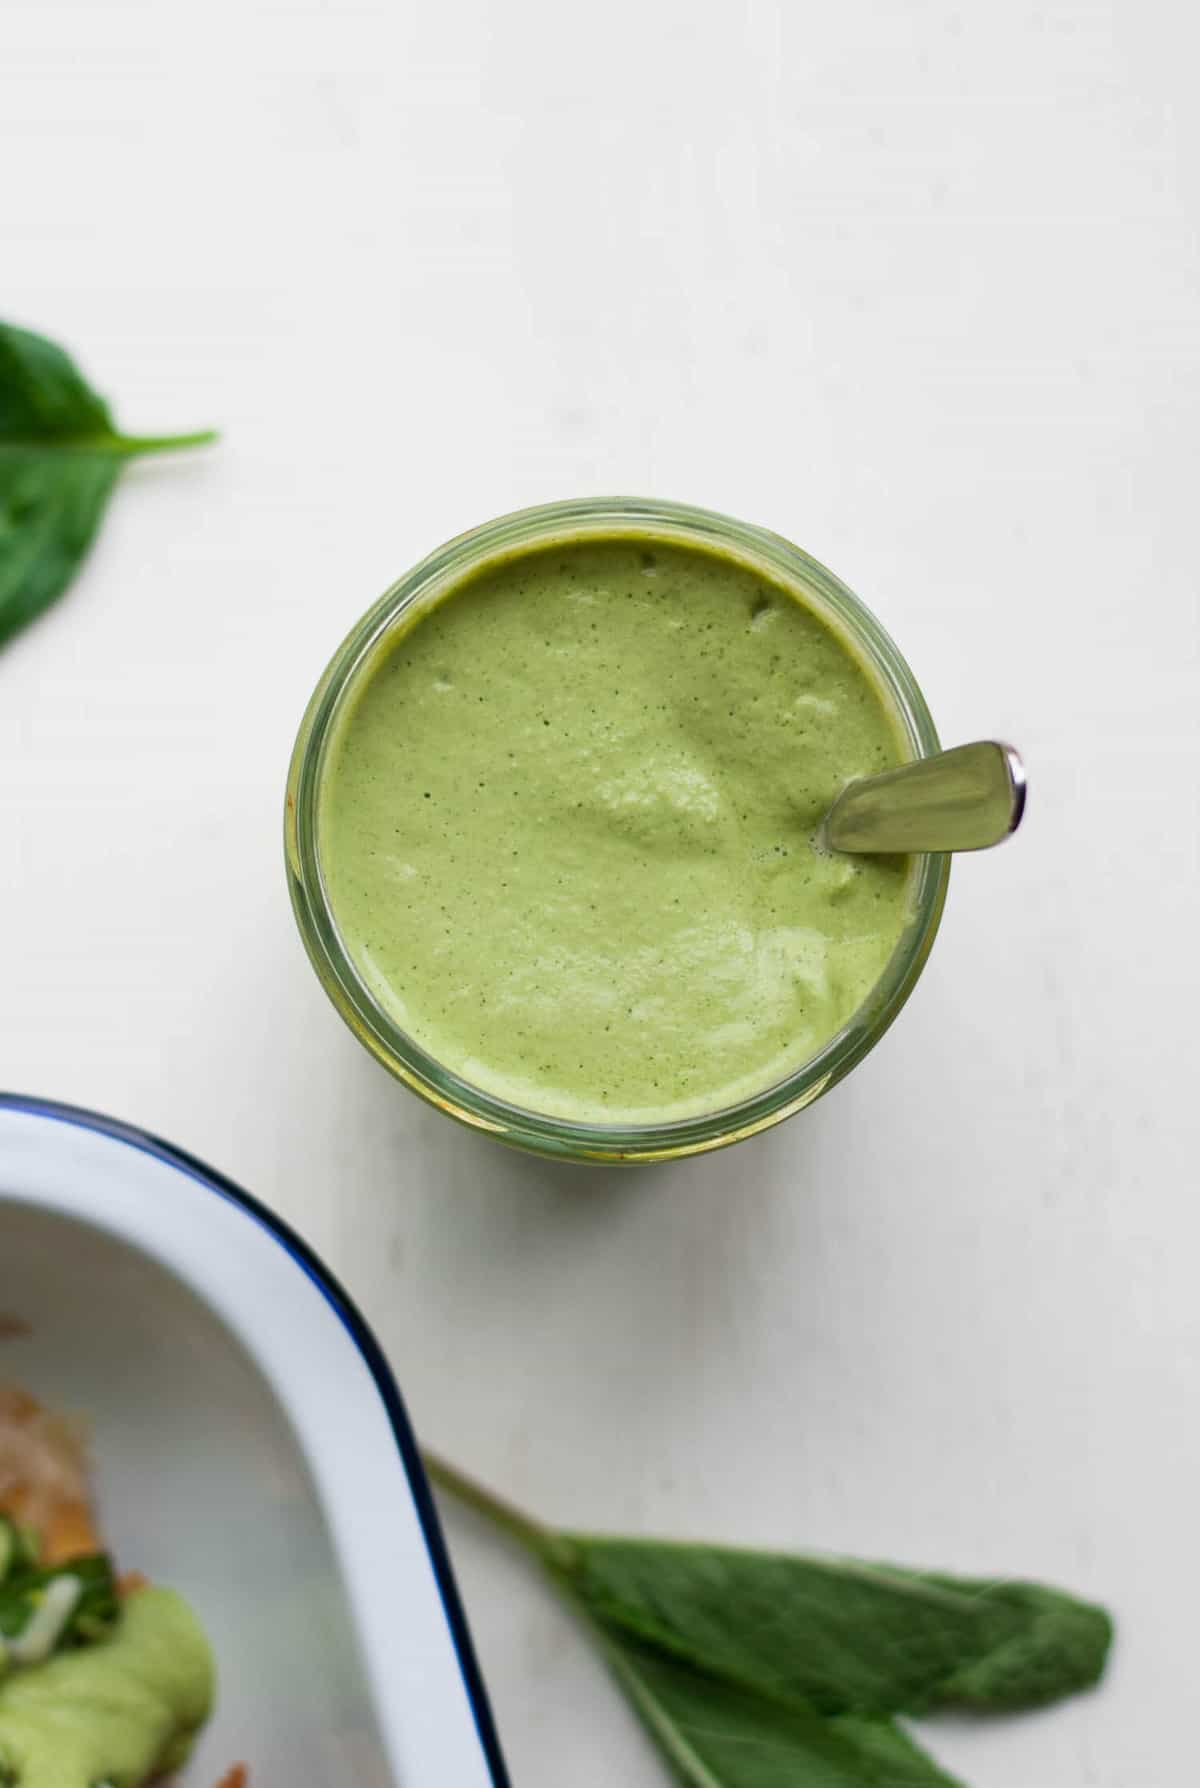 5 Minute Vibrant Spring Sauce - this delicious green sauce recipe has just a few ingredients - peas, cashews, basil, mint, lime - and tastes like you've bottled spring! Ready in 5 minutes flat! | eatloveeats.com